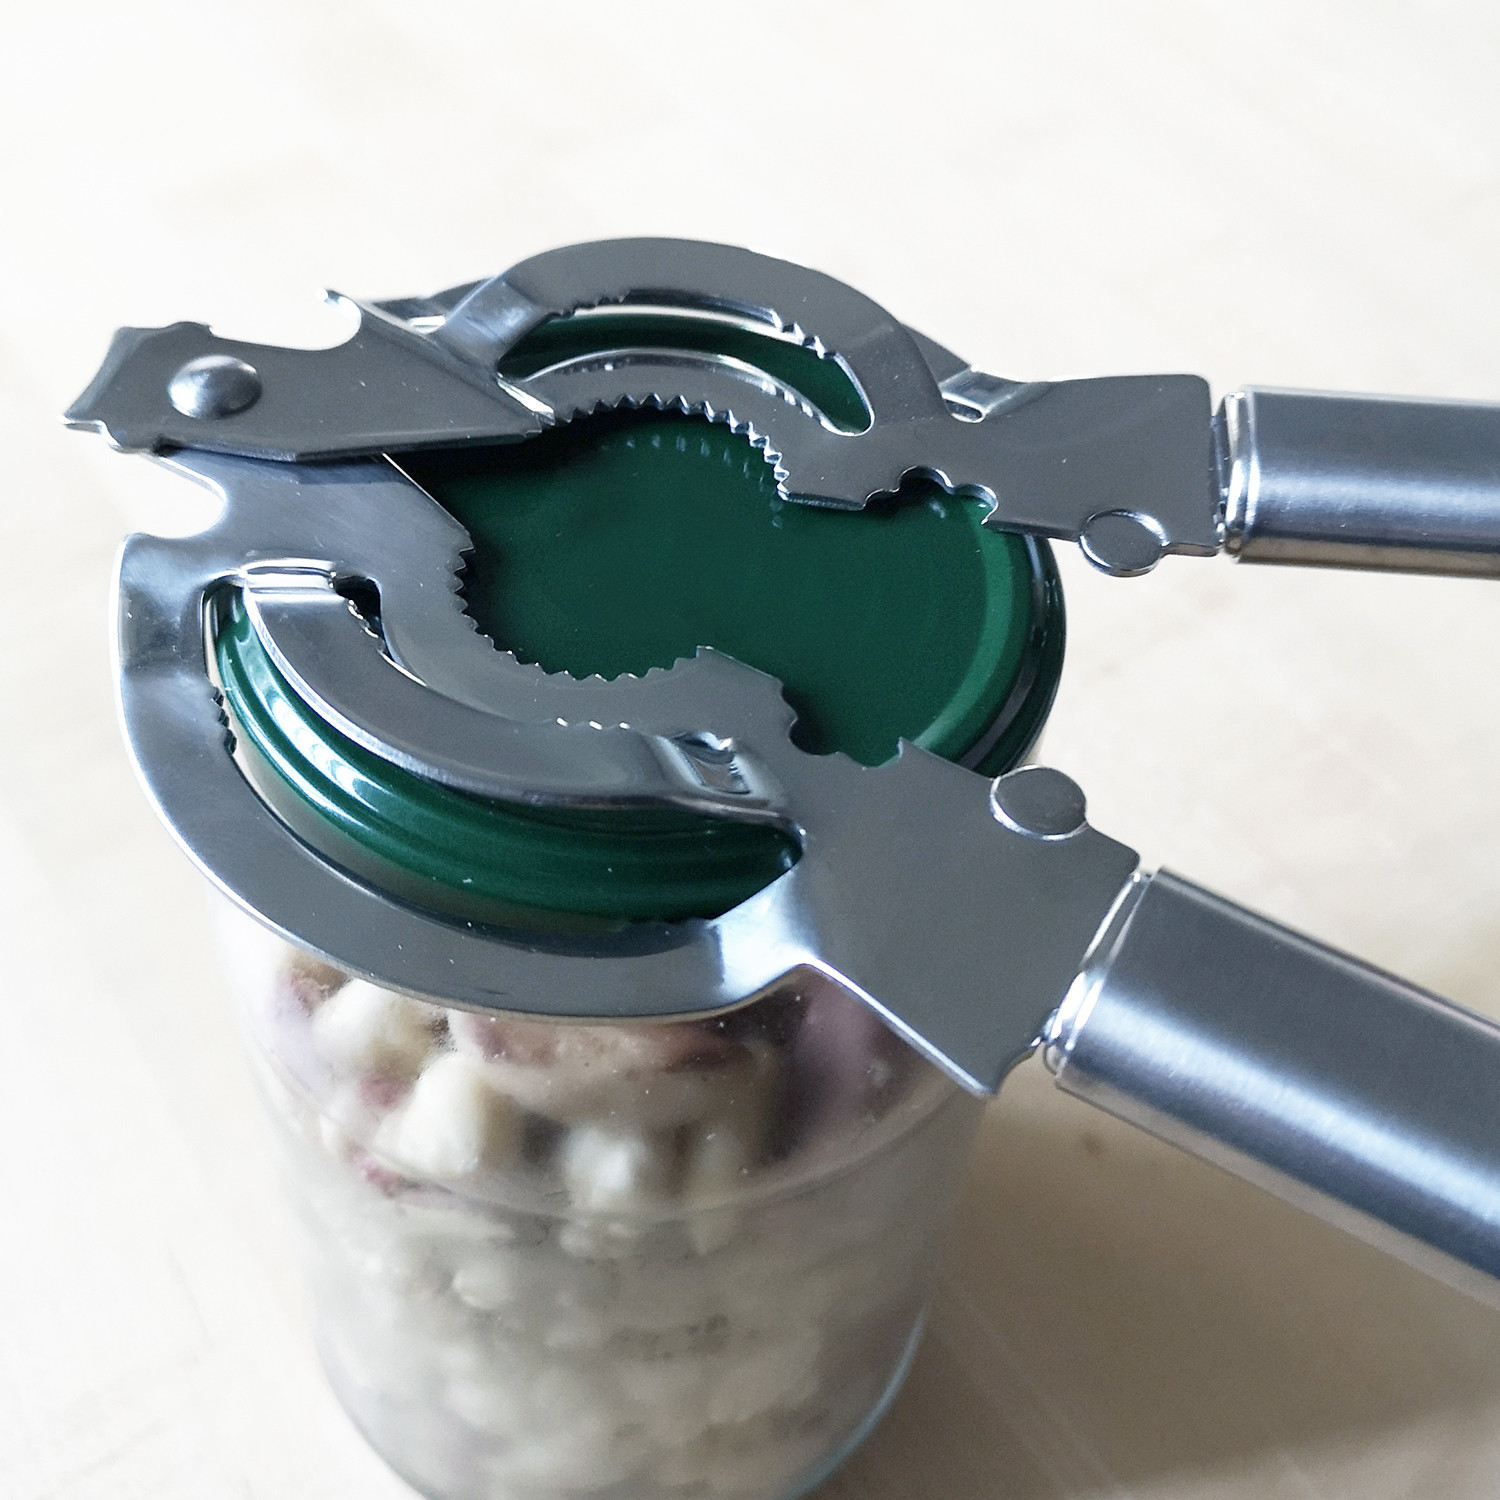 Side-cutting can opener - POC, Easy opening - Cristel